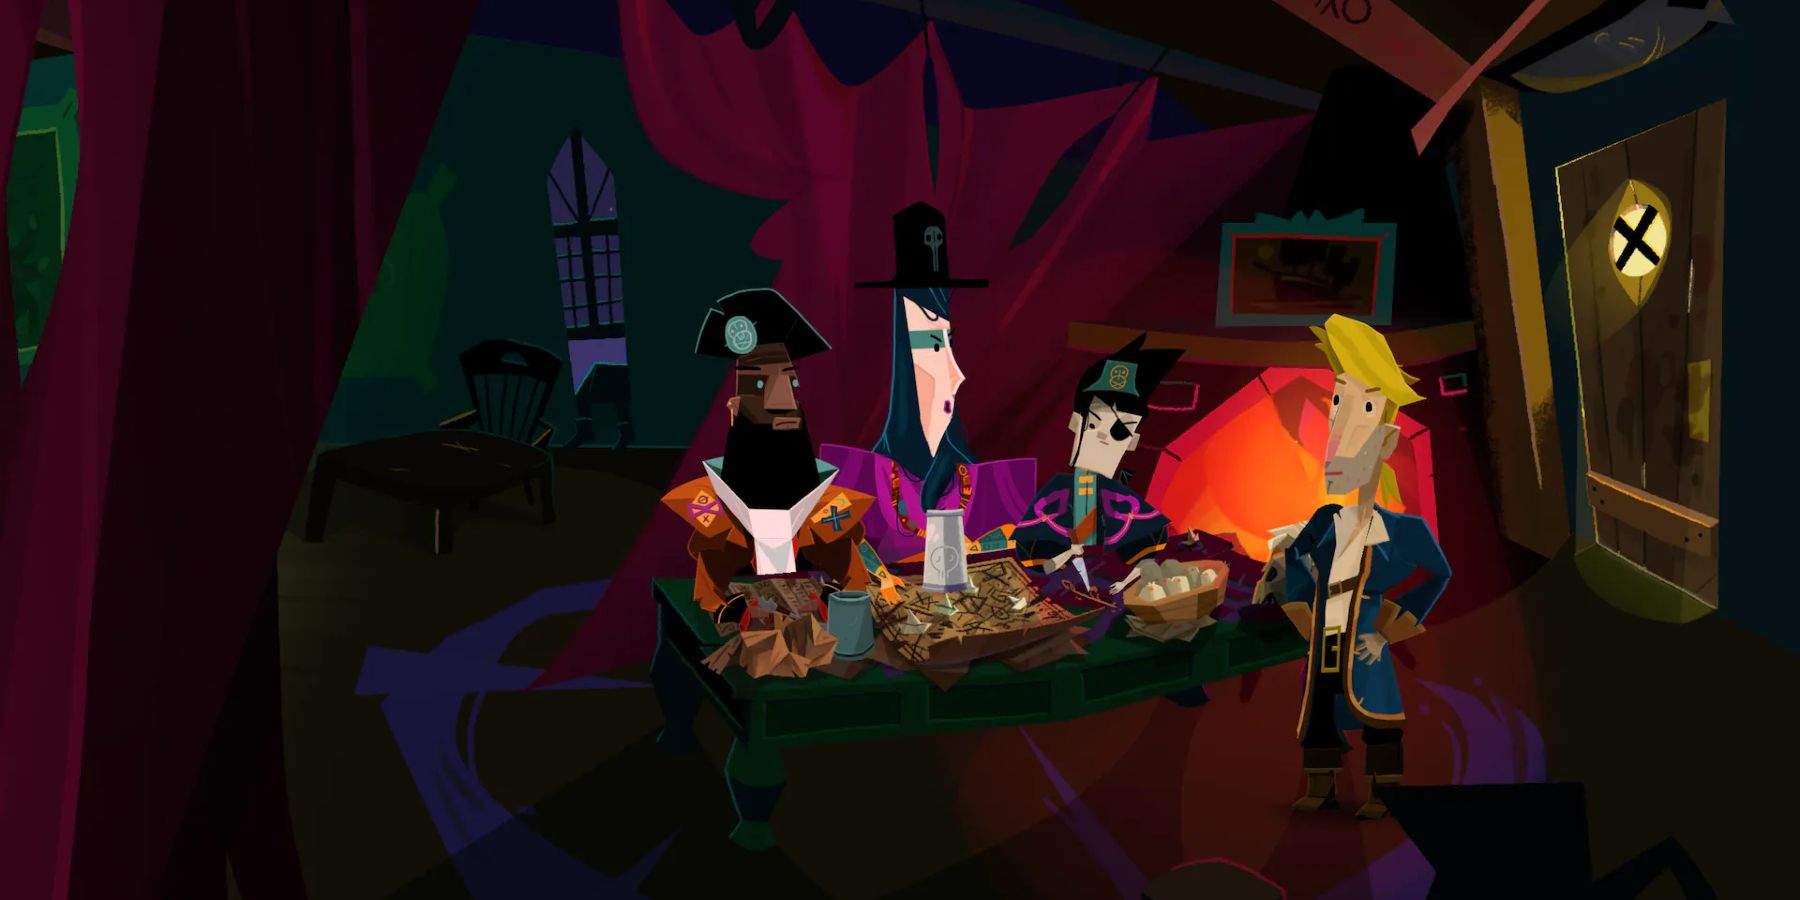 Image from the upcoming Return to Monkey Island showing Guybrush Threepwood in a dark room with some other pirates.